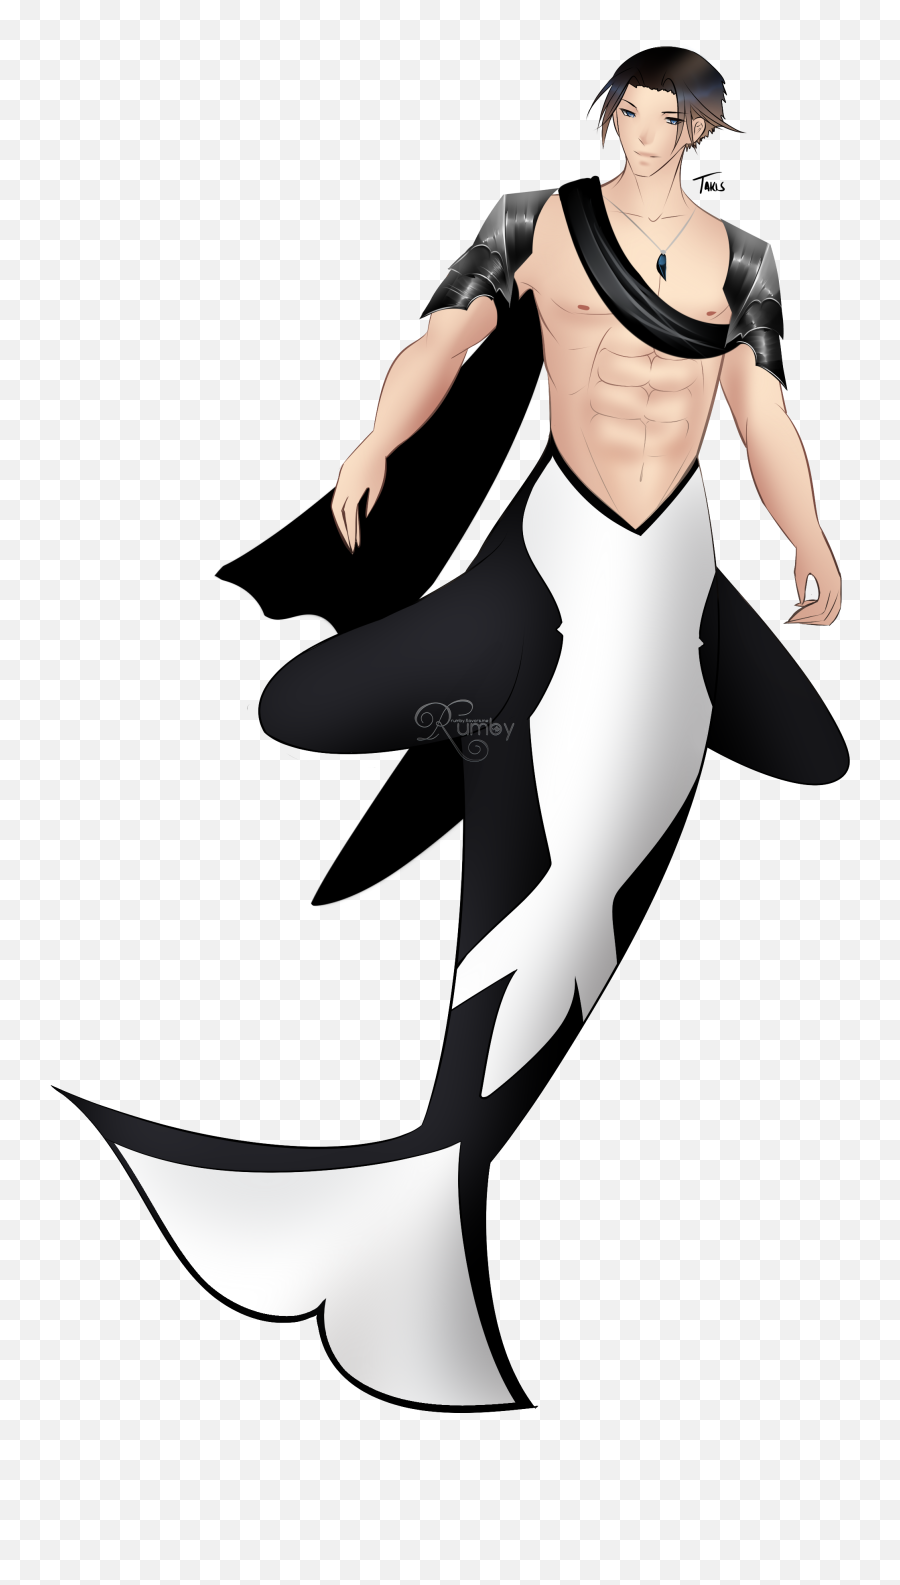 In The World Of Dream Crystal Takis An Orca Merman - Orca Merman Emoji,Merman Emoji